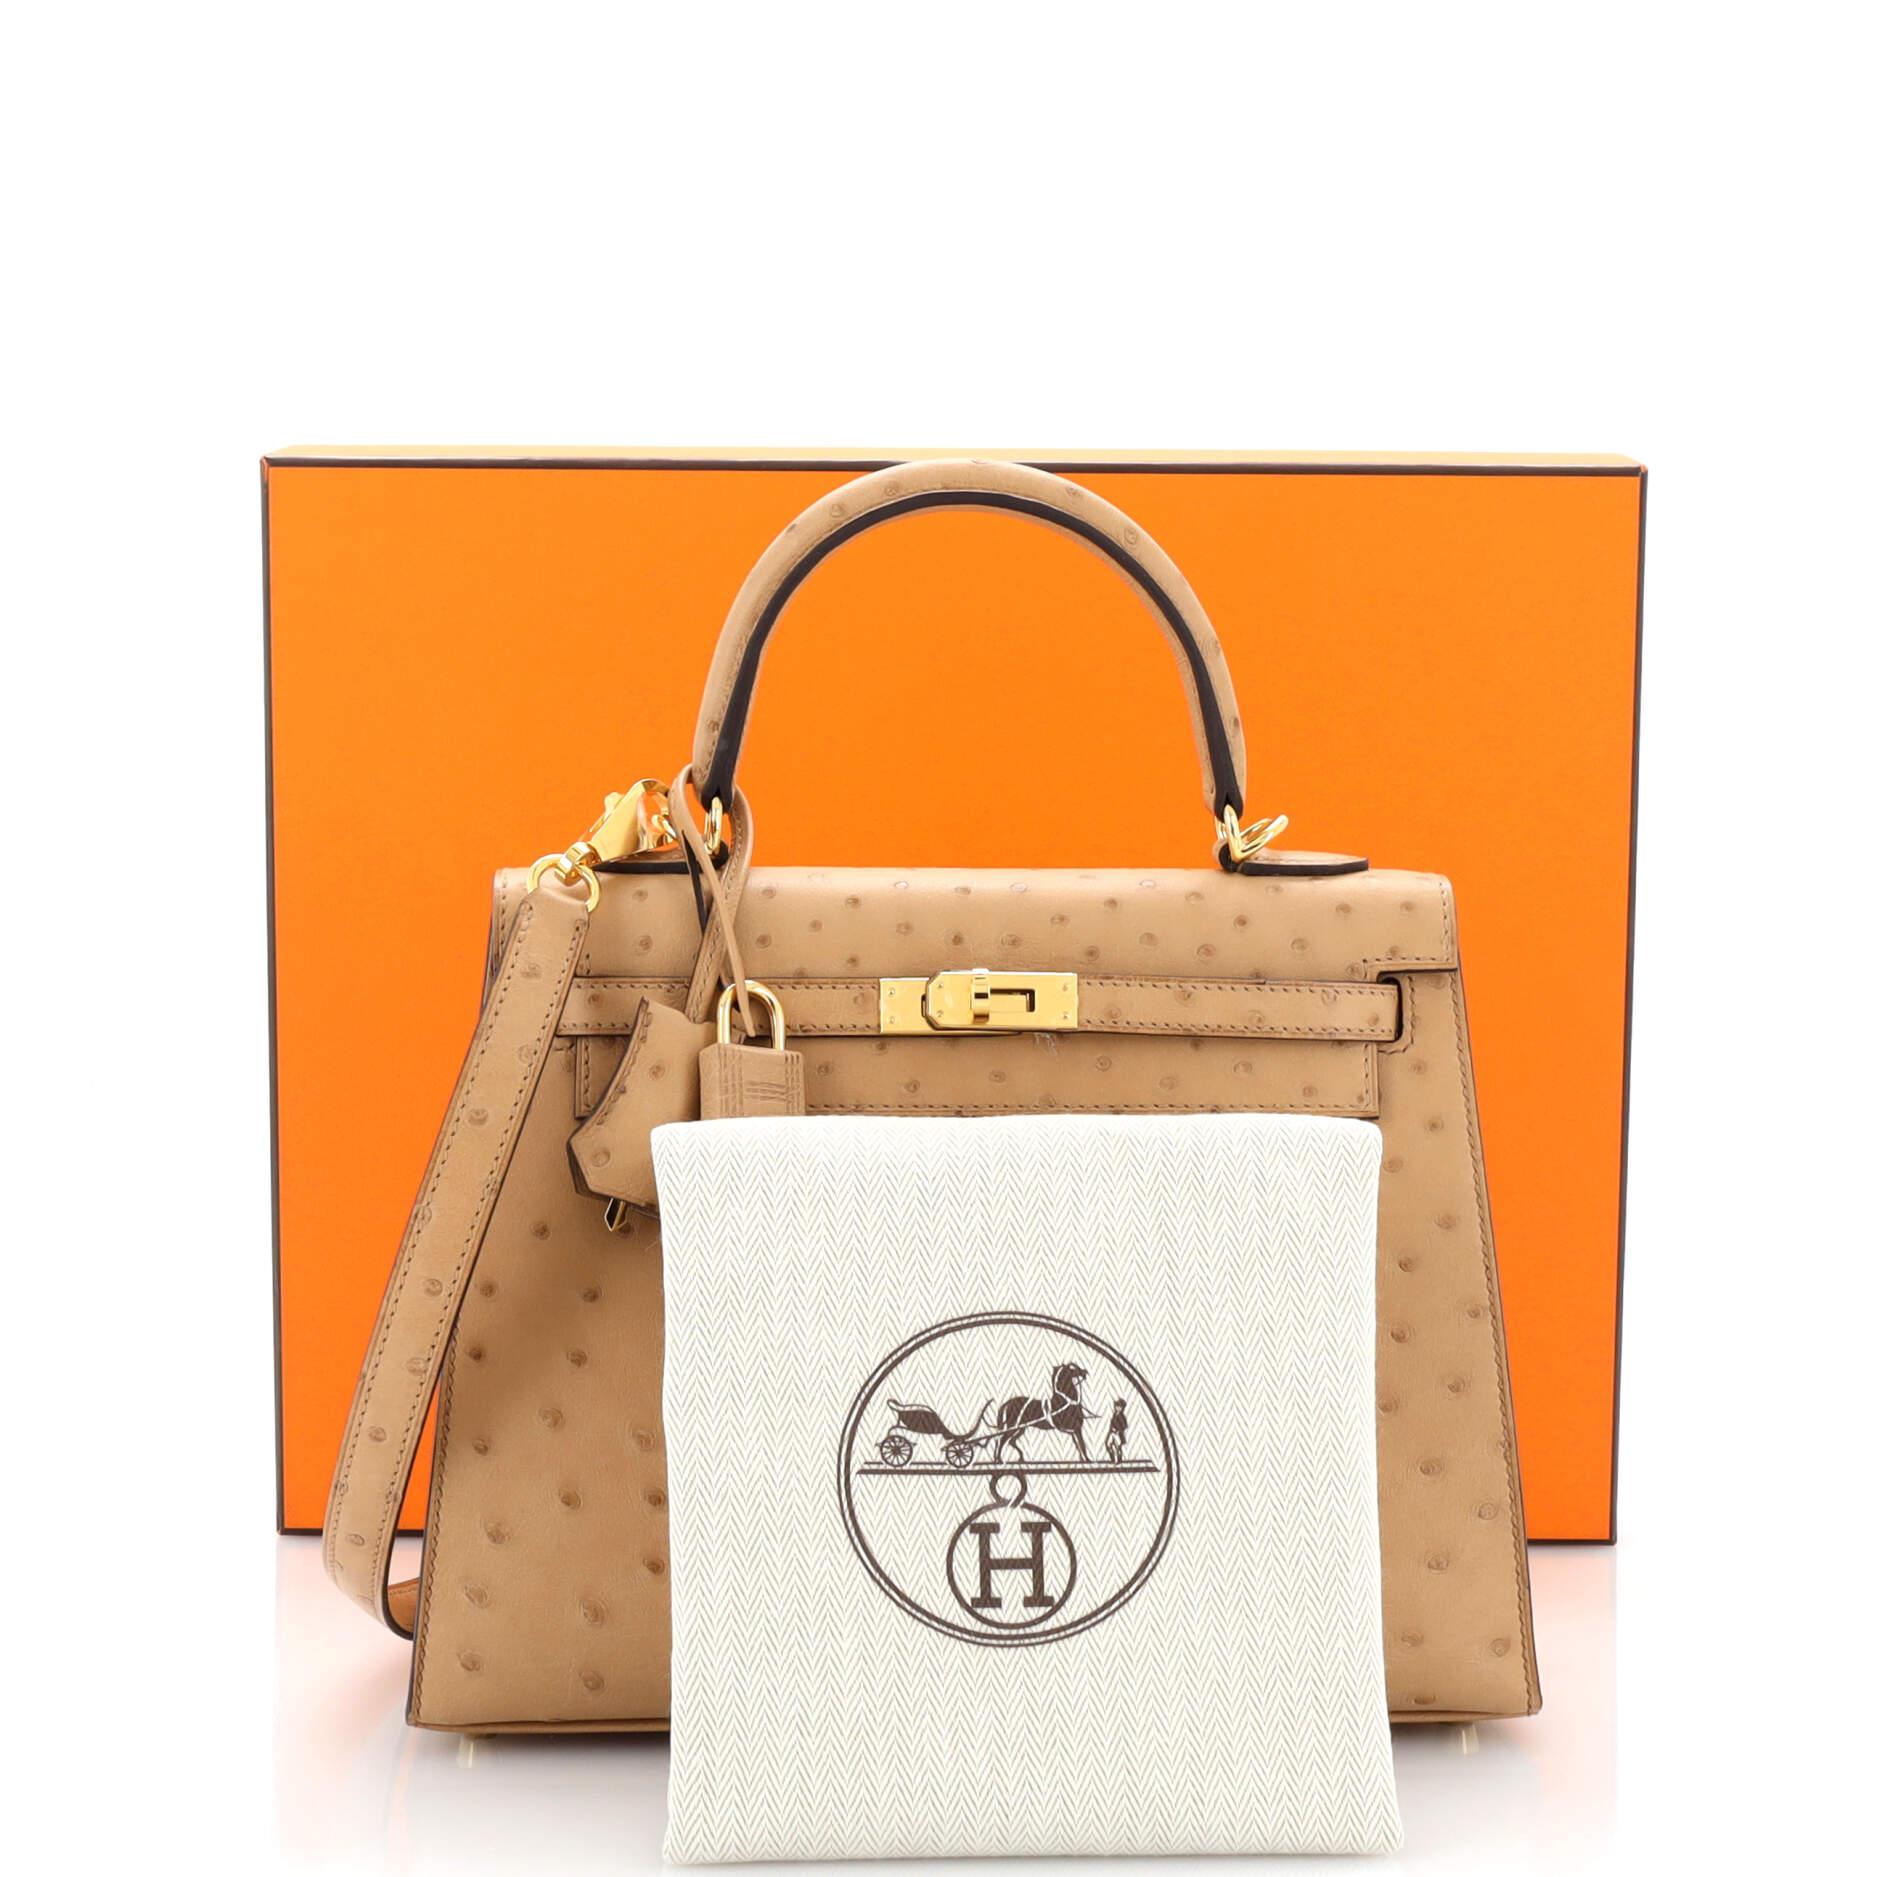 Ostrich Kelly 25 - 5 For Sale on 1stDibs  ostrich kelly 25 price, hermes  kelly ostrich price, hermes ostrich kelly 25